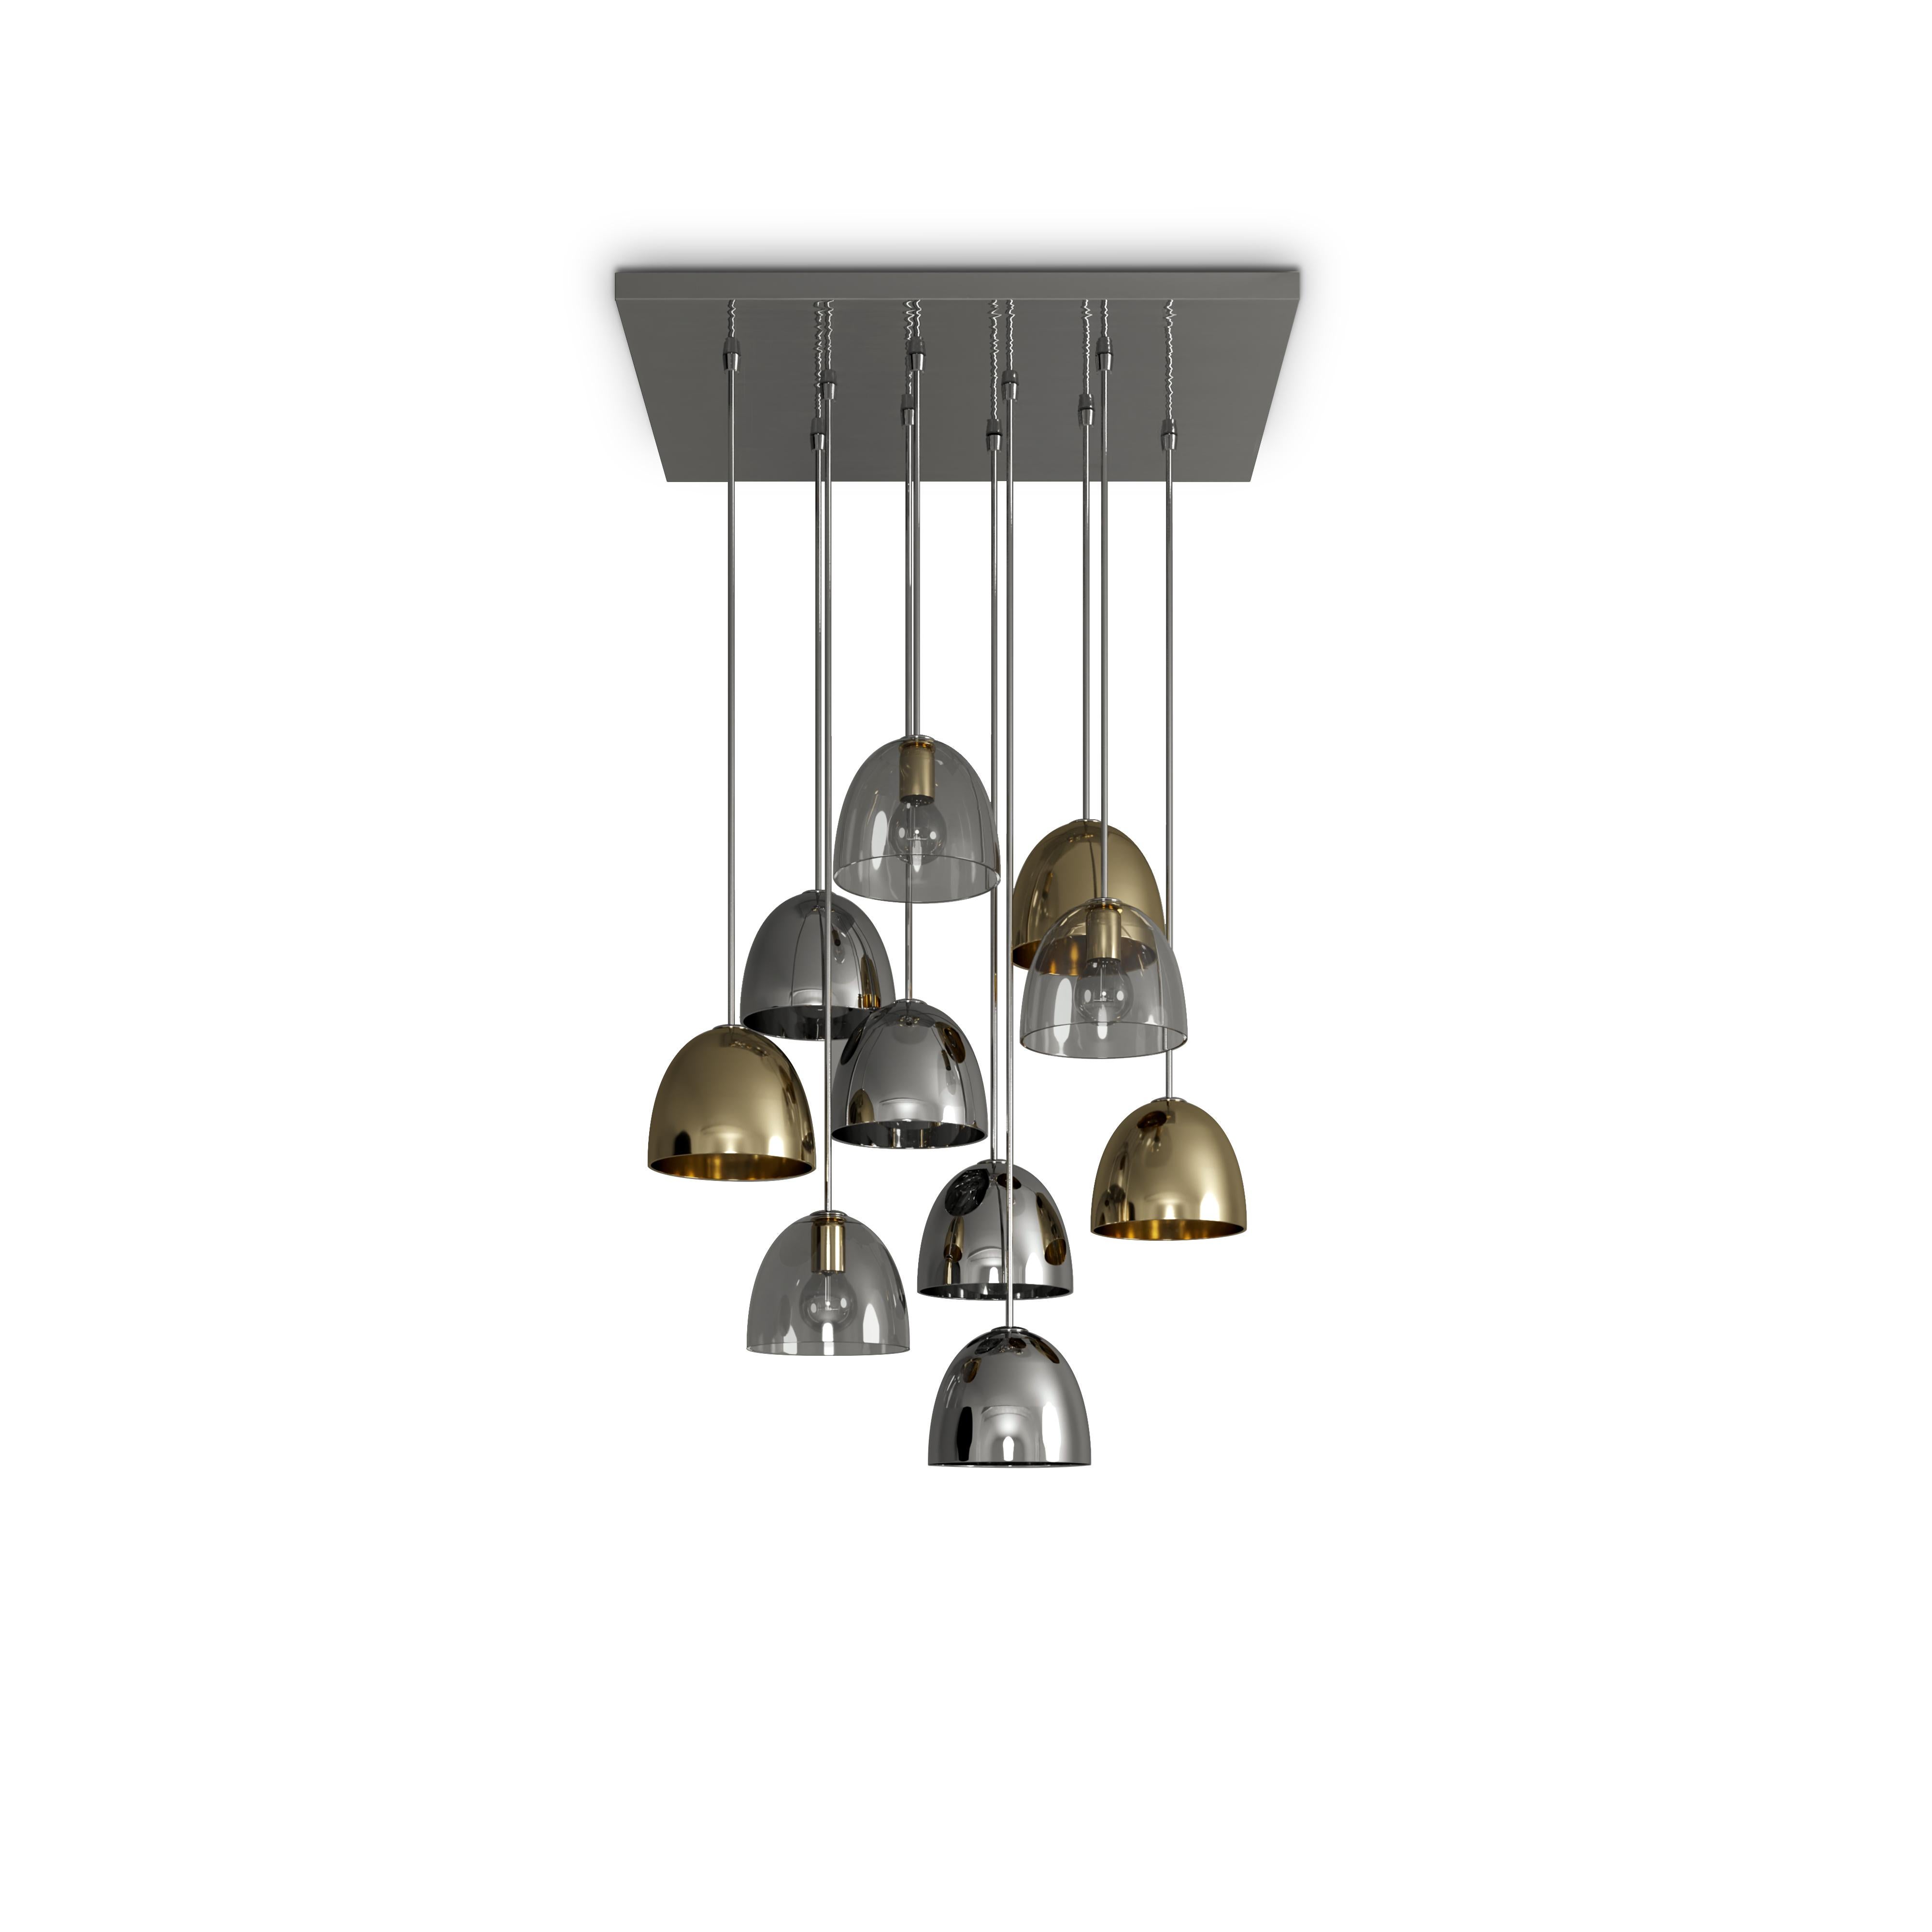 Portuguese 21st Century Bombarda II Suspension Lamp Brass Stainless Steel For Sale